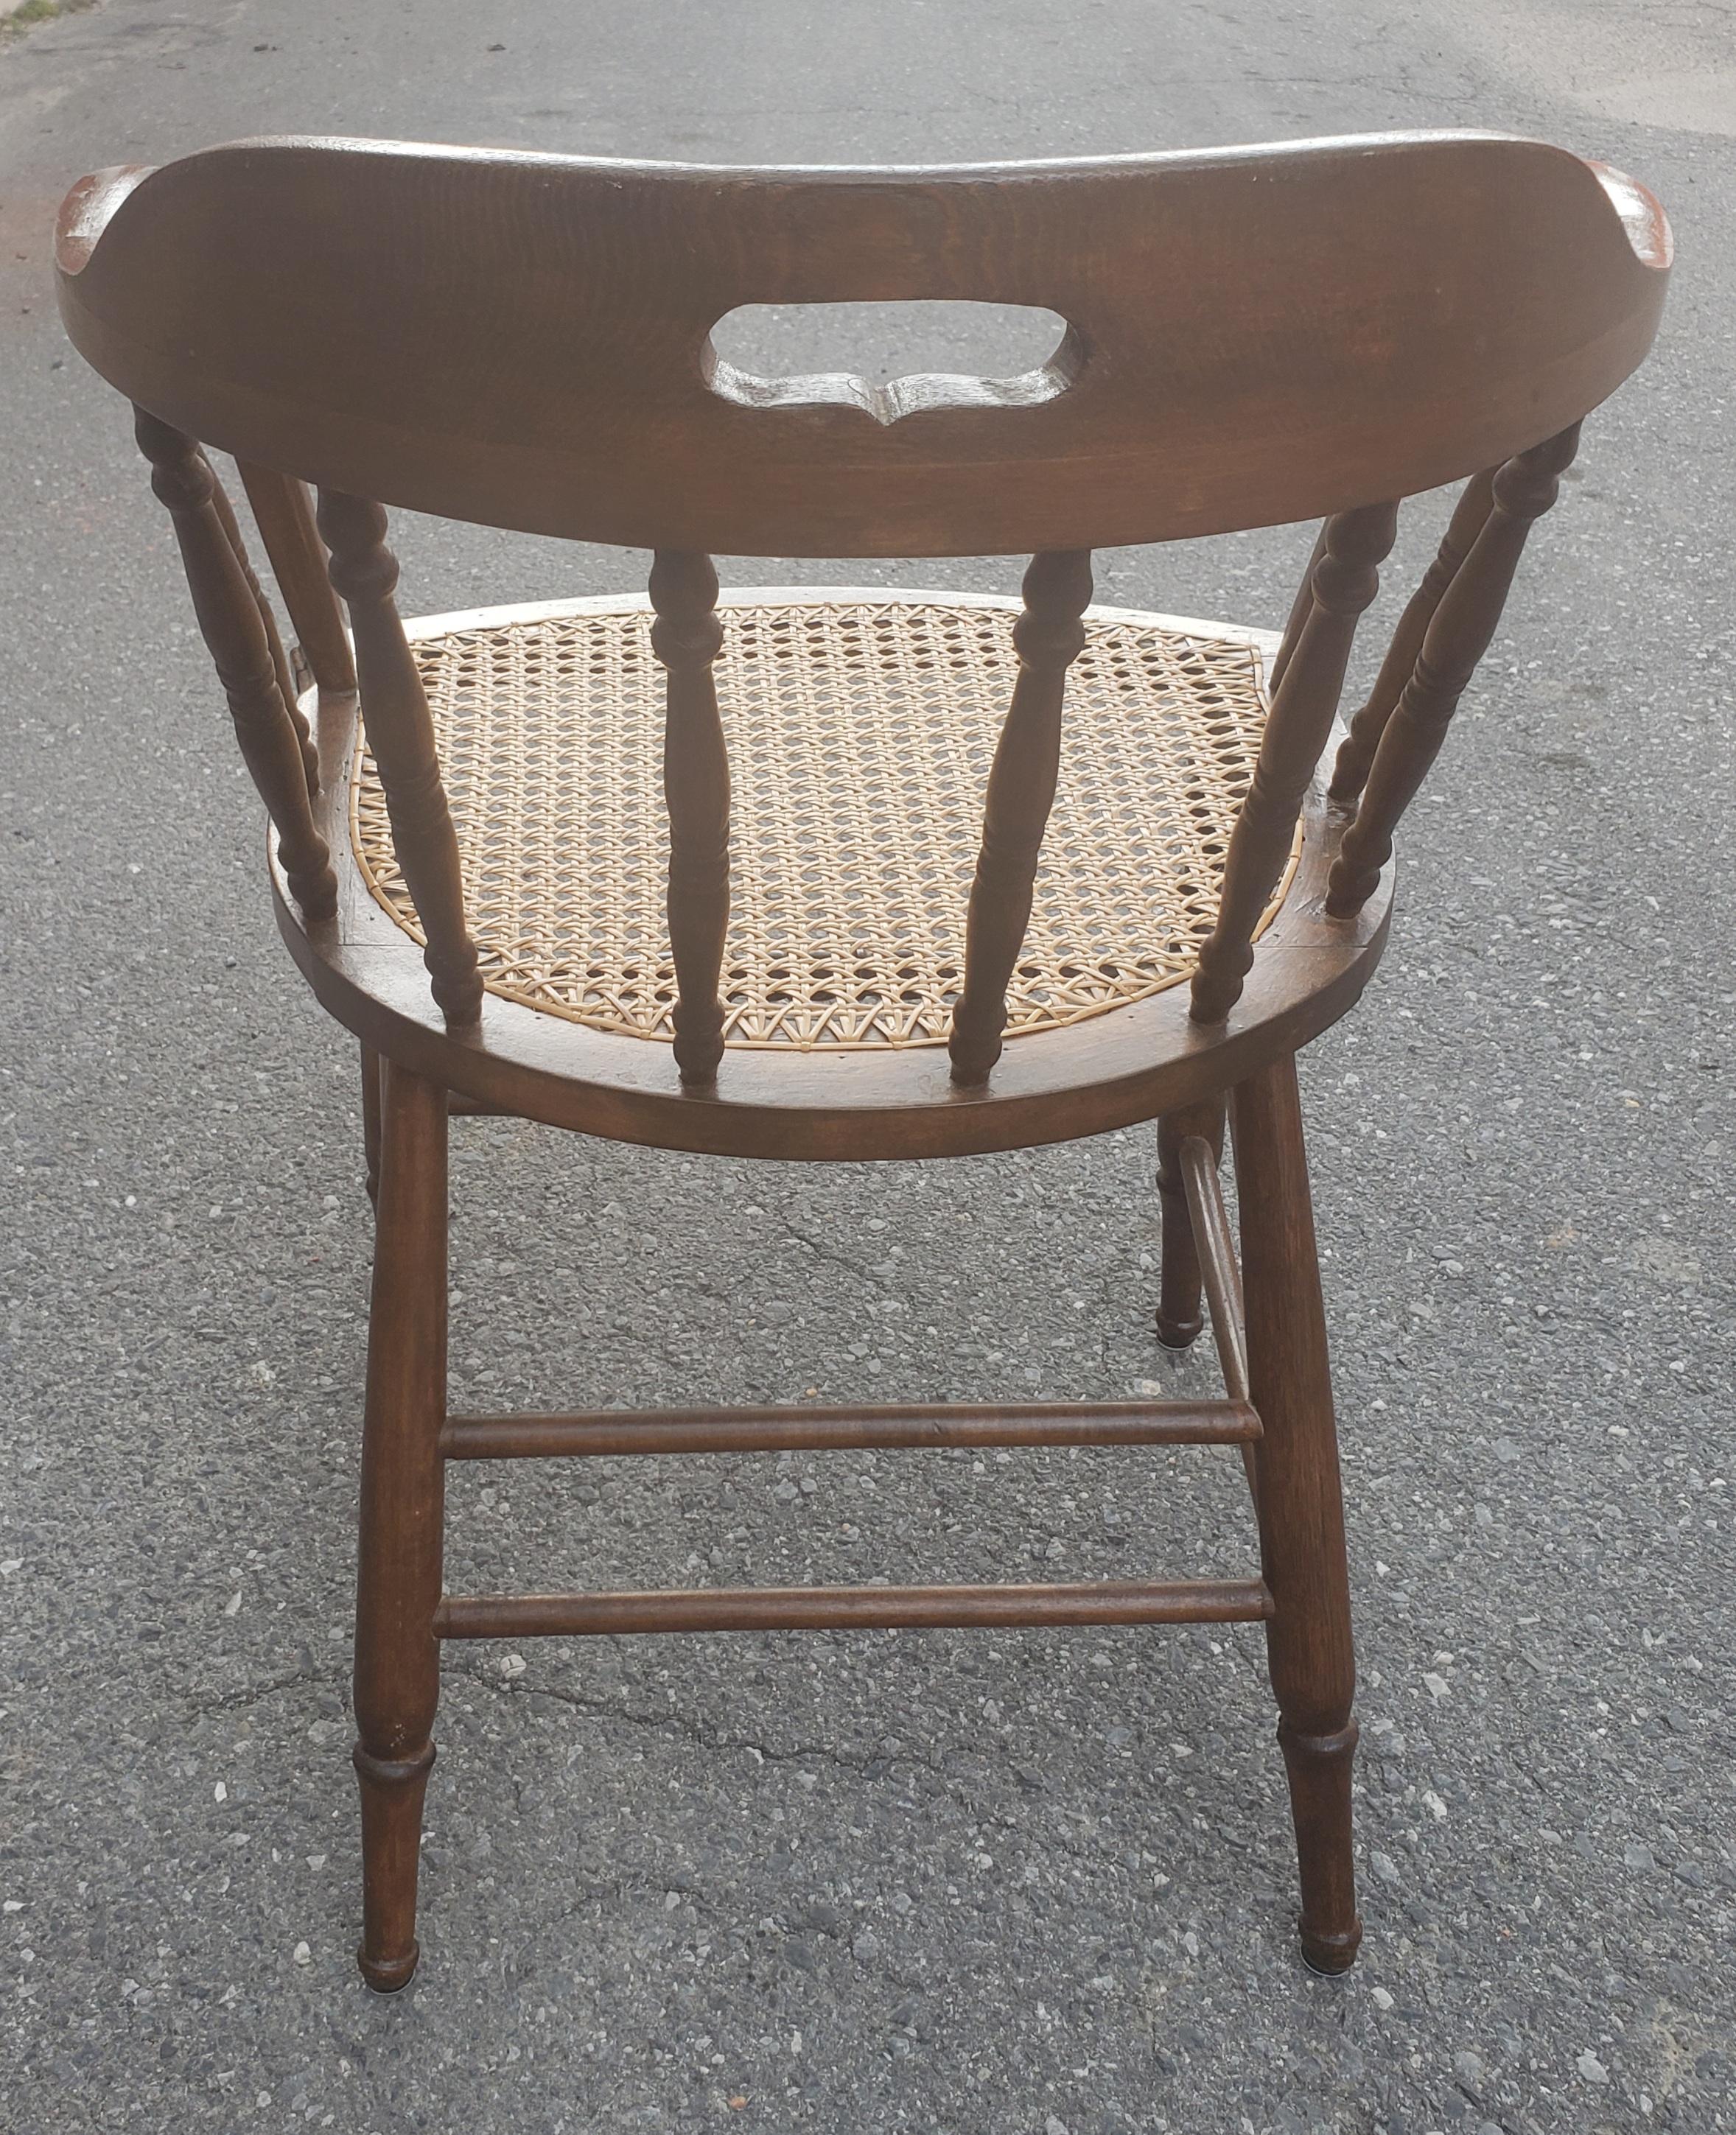 20th Century Antique Barrel Back Firehouse Windsor Chair with Cane Seat